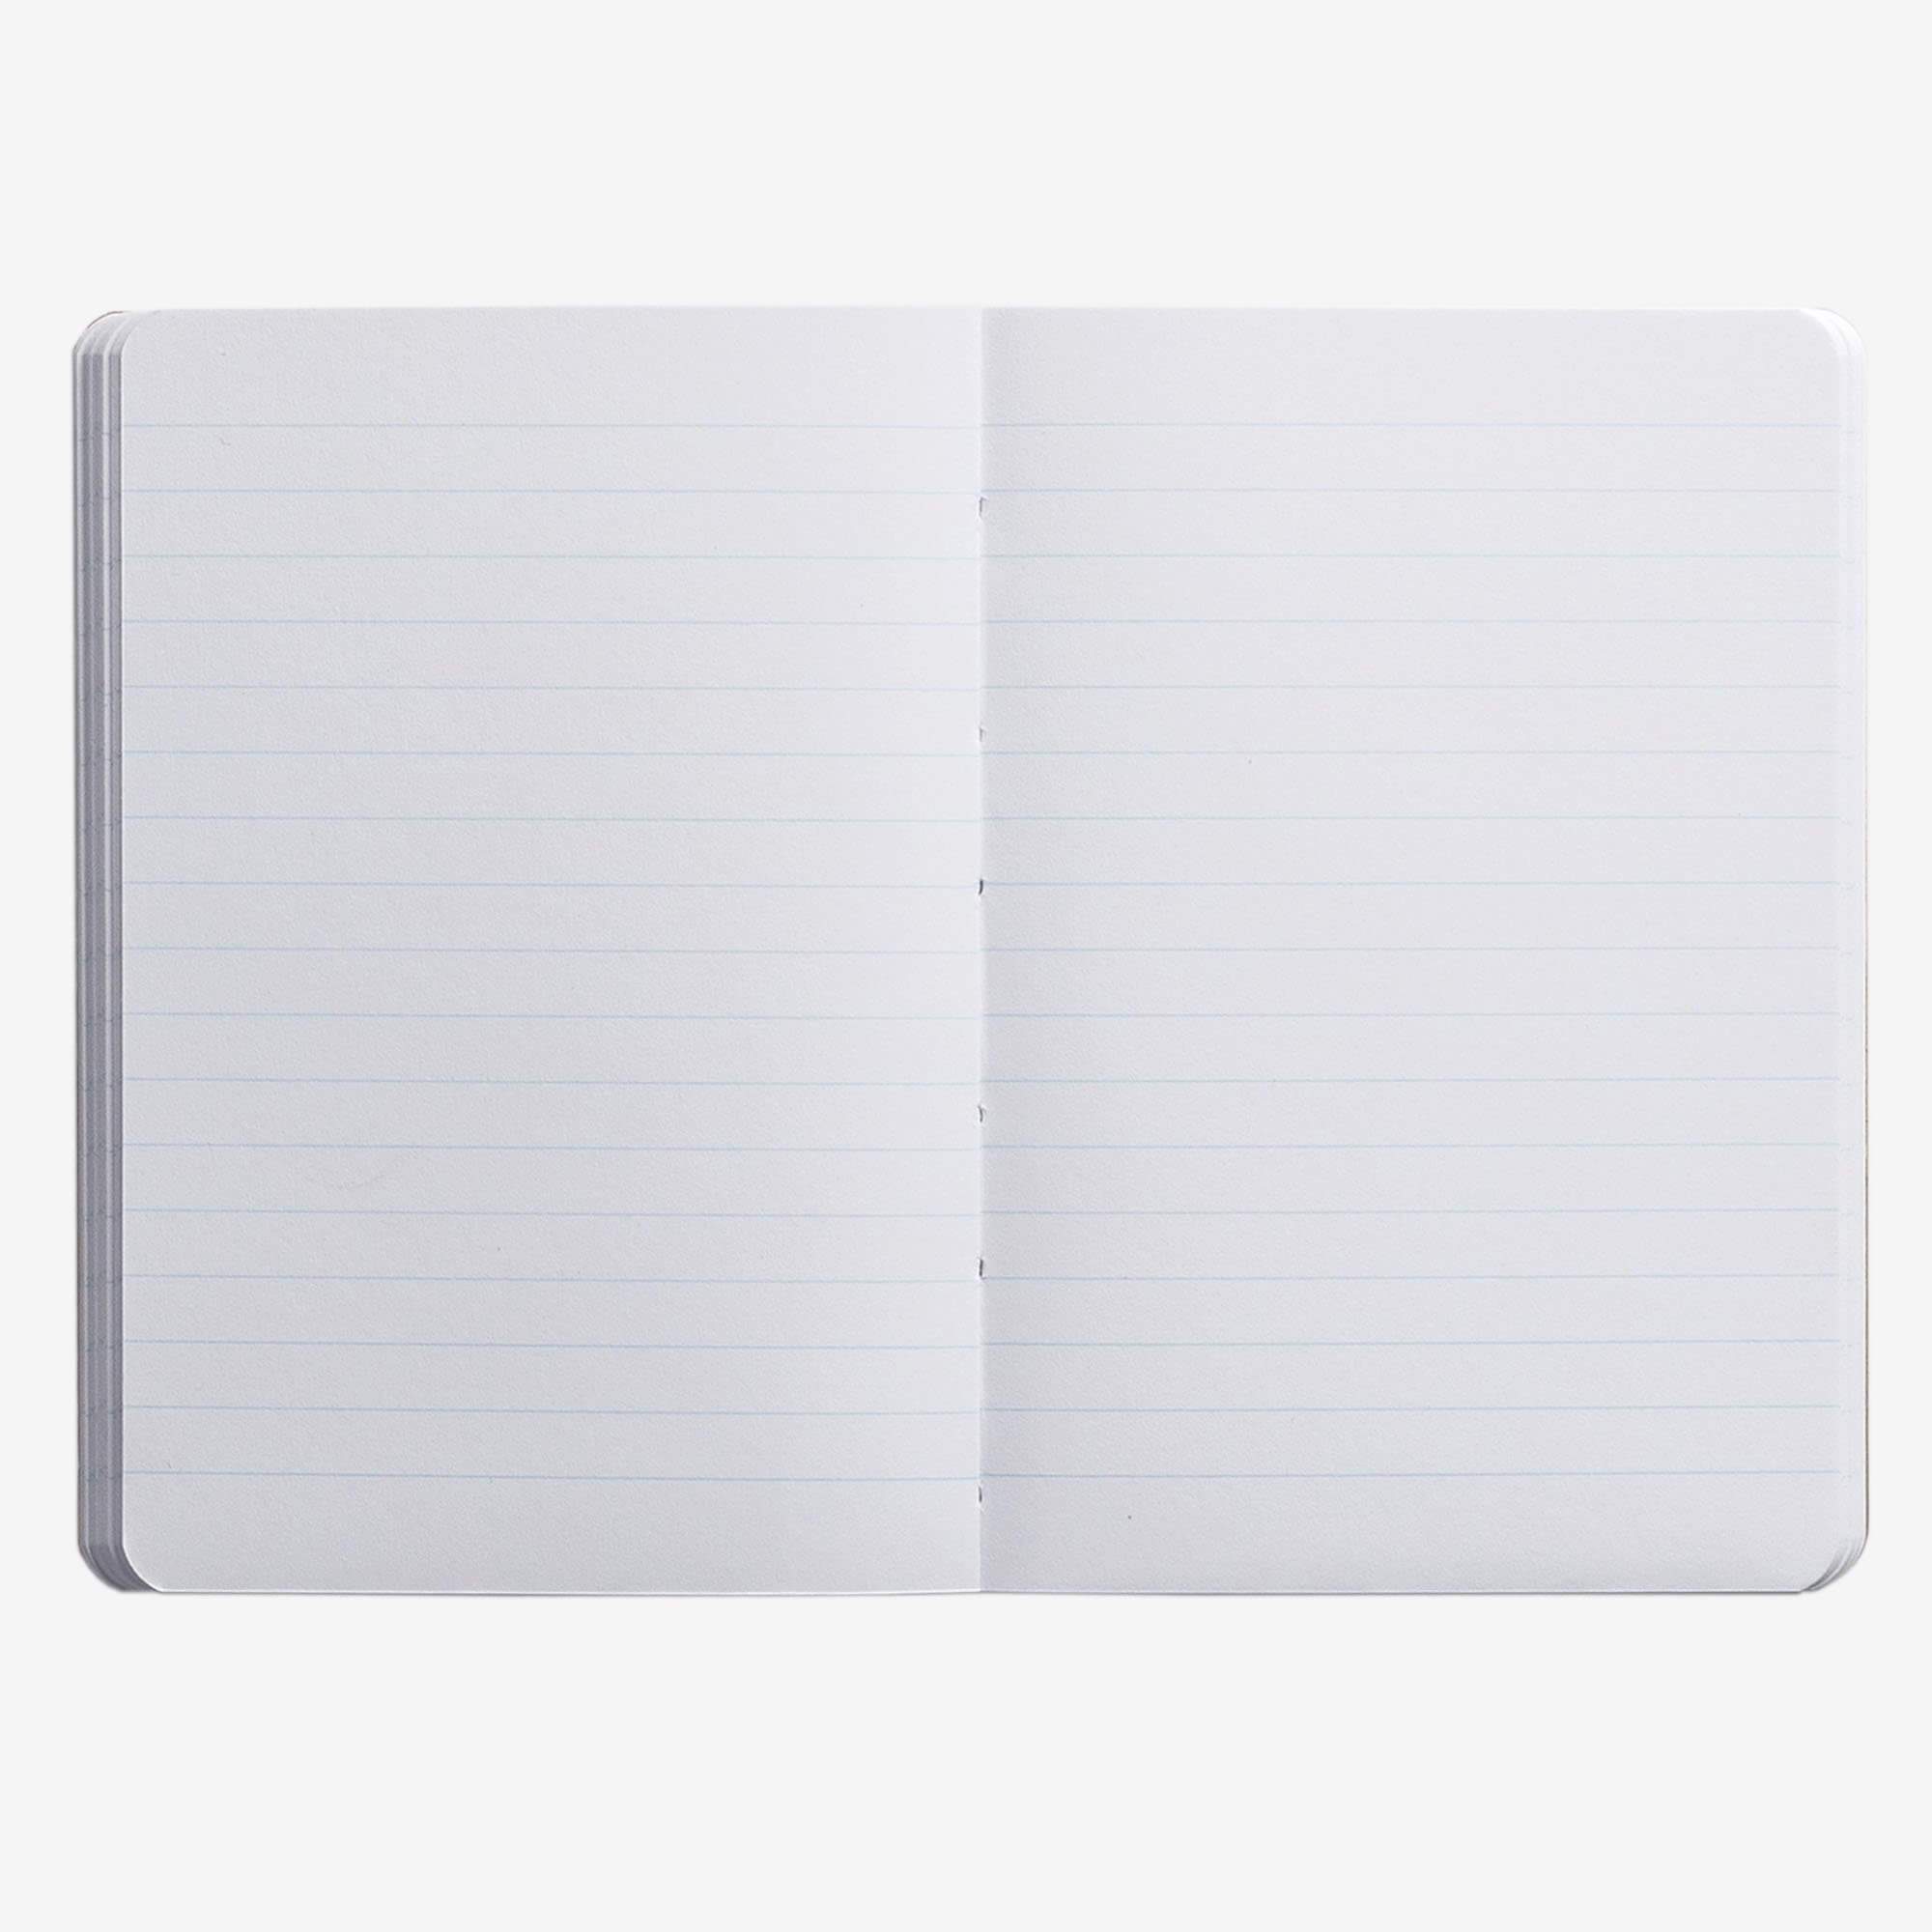 Notebook S Be lucky - Carnet 168 pages Legami 